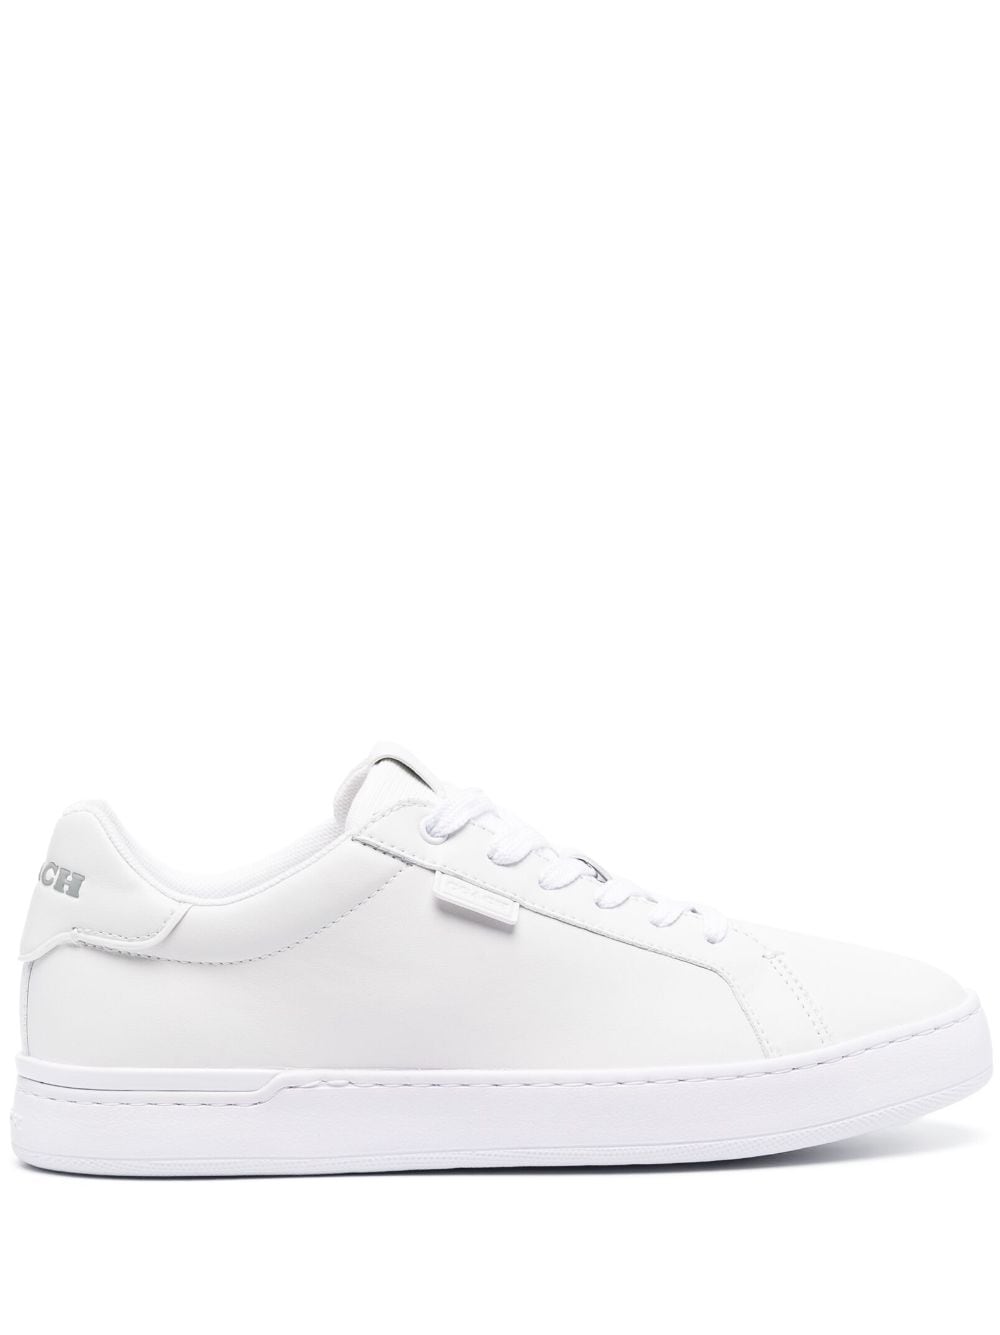 Coach embossed-logo low-top sneakers - White von Coach